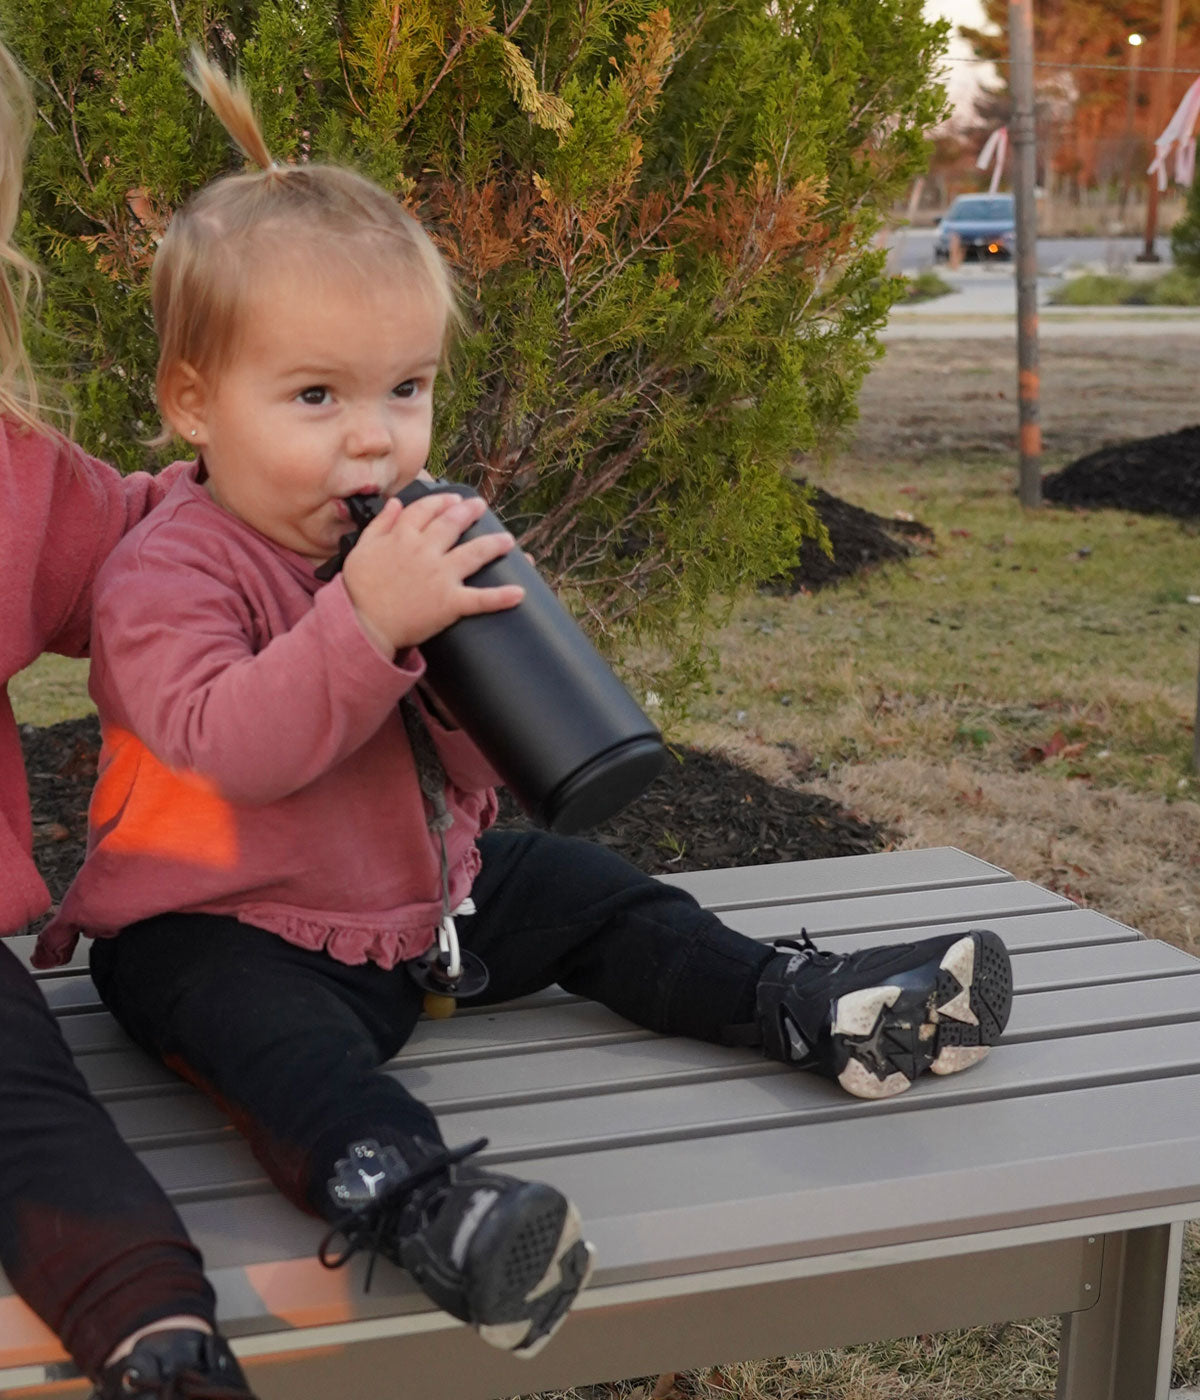 This image shows a toddler-aged girl taking a drink from a black 14oz Sport Bottle.